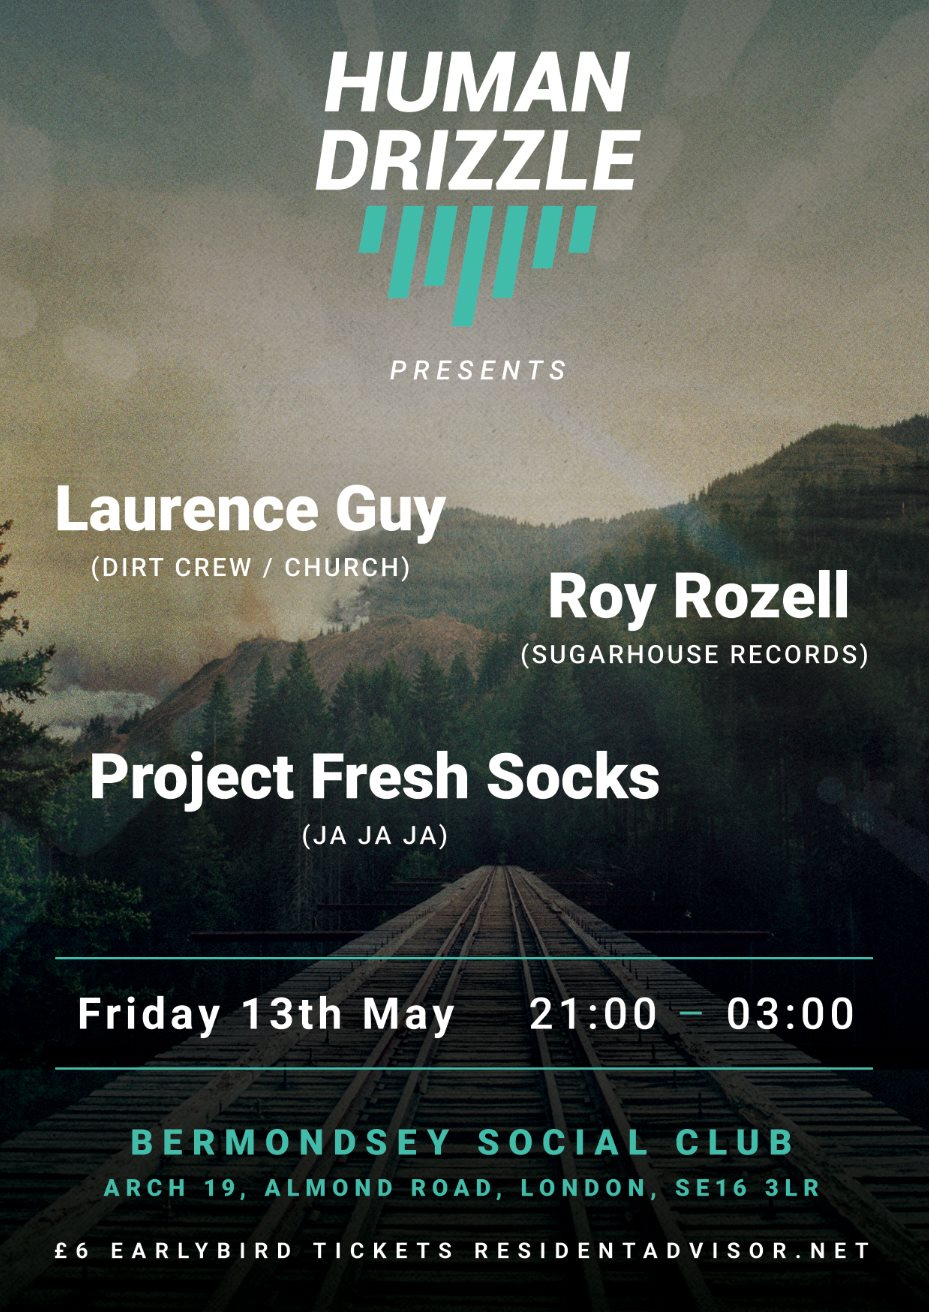 [CANCELLED] Human Drizzle presents...Laurence Guy, Roy Rozell & Project Fresh Socks - Flyer front